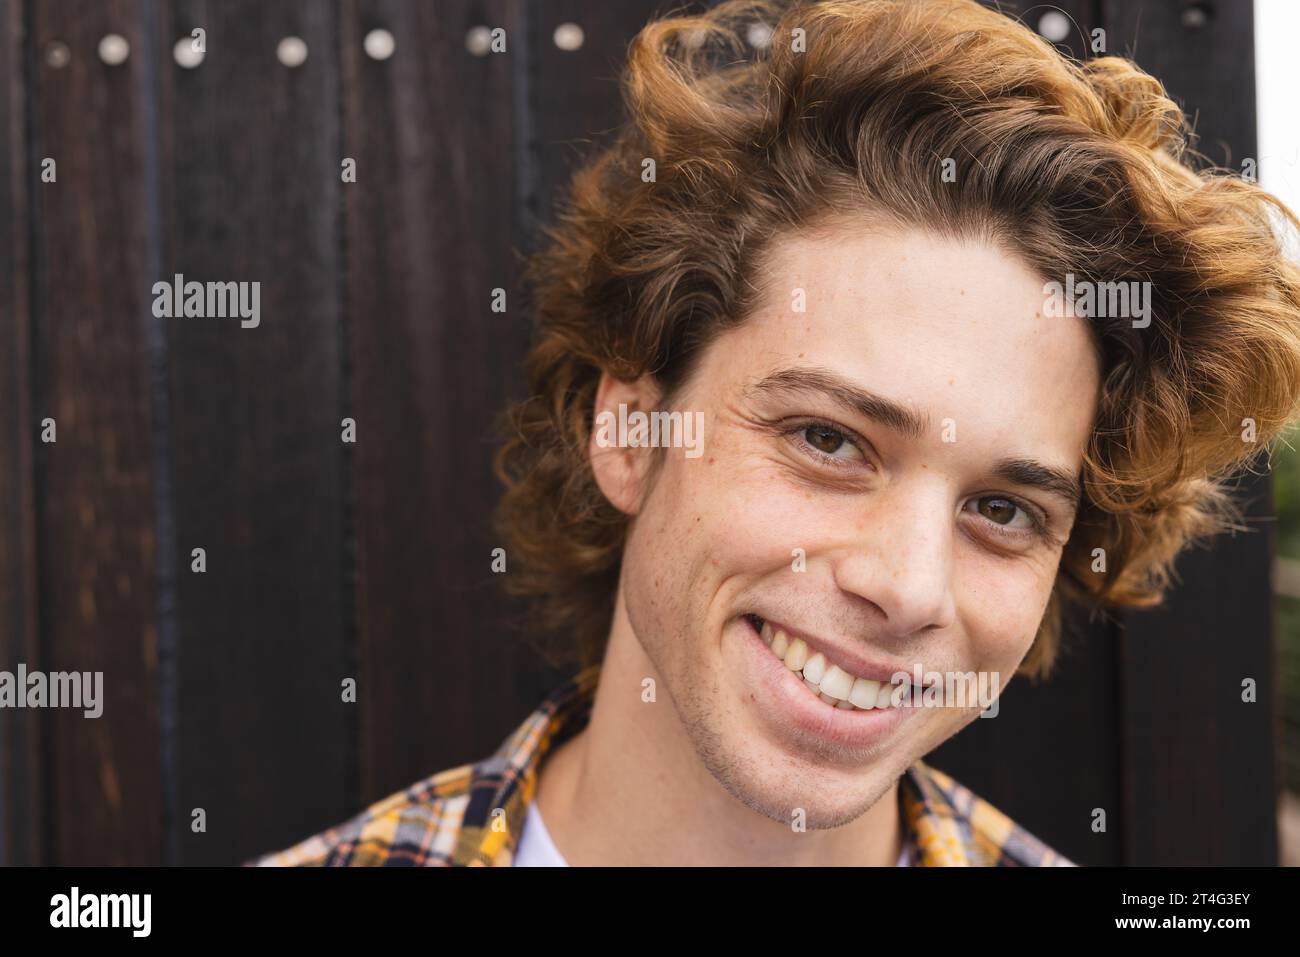 Portrait of happy caucasian man with curly hair at balcony over wooden wall Stock Photo